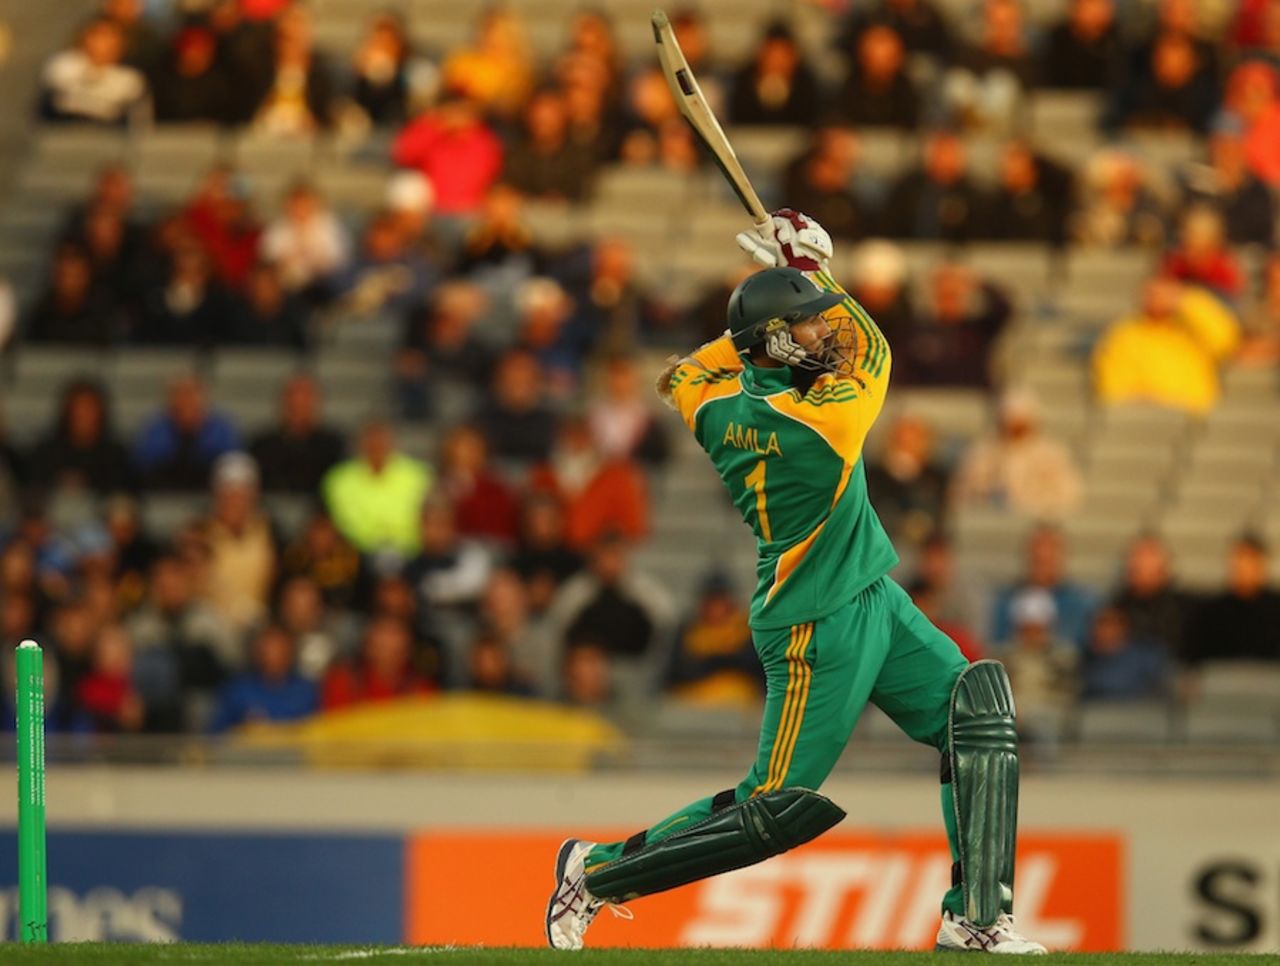 Hashim Amla lofts down the ground, New Zealand v South Africa, 3rd ODI, Auckland, March 3, 2012